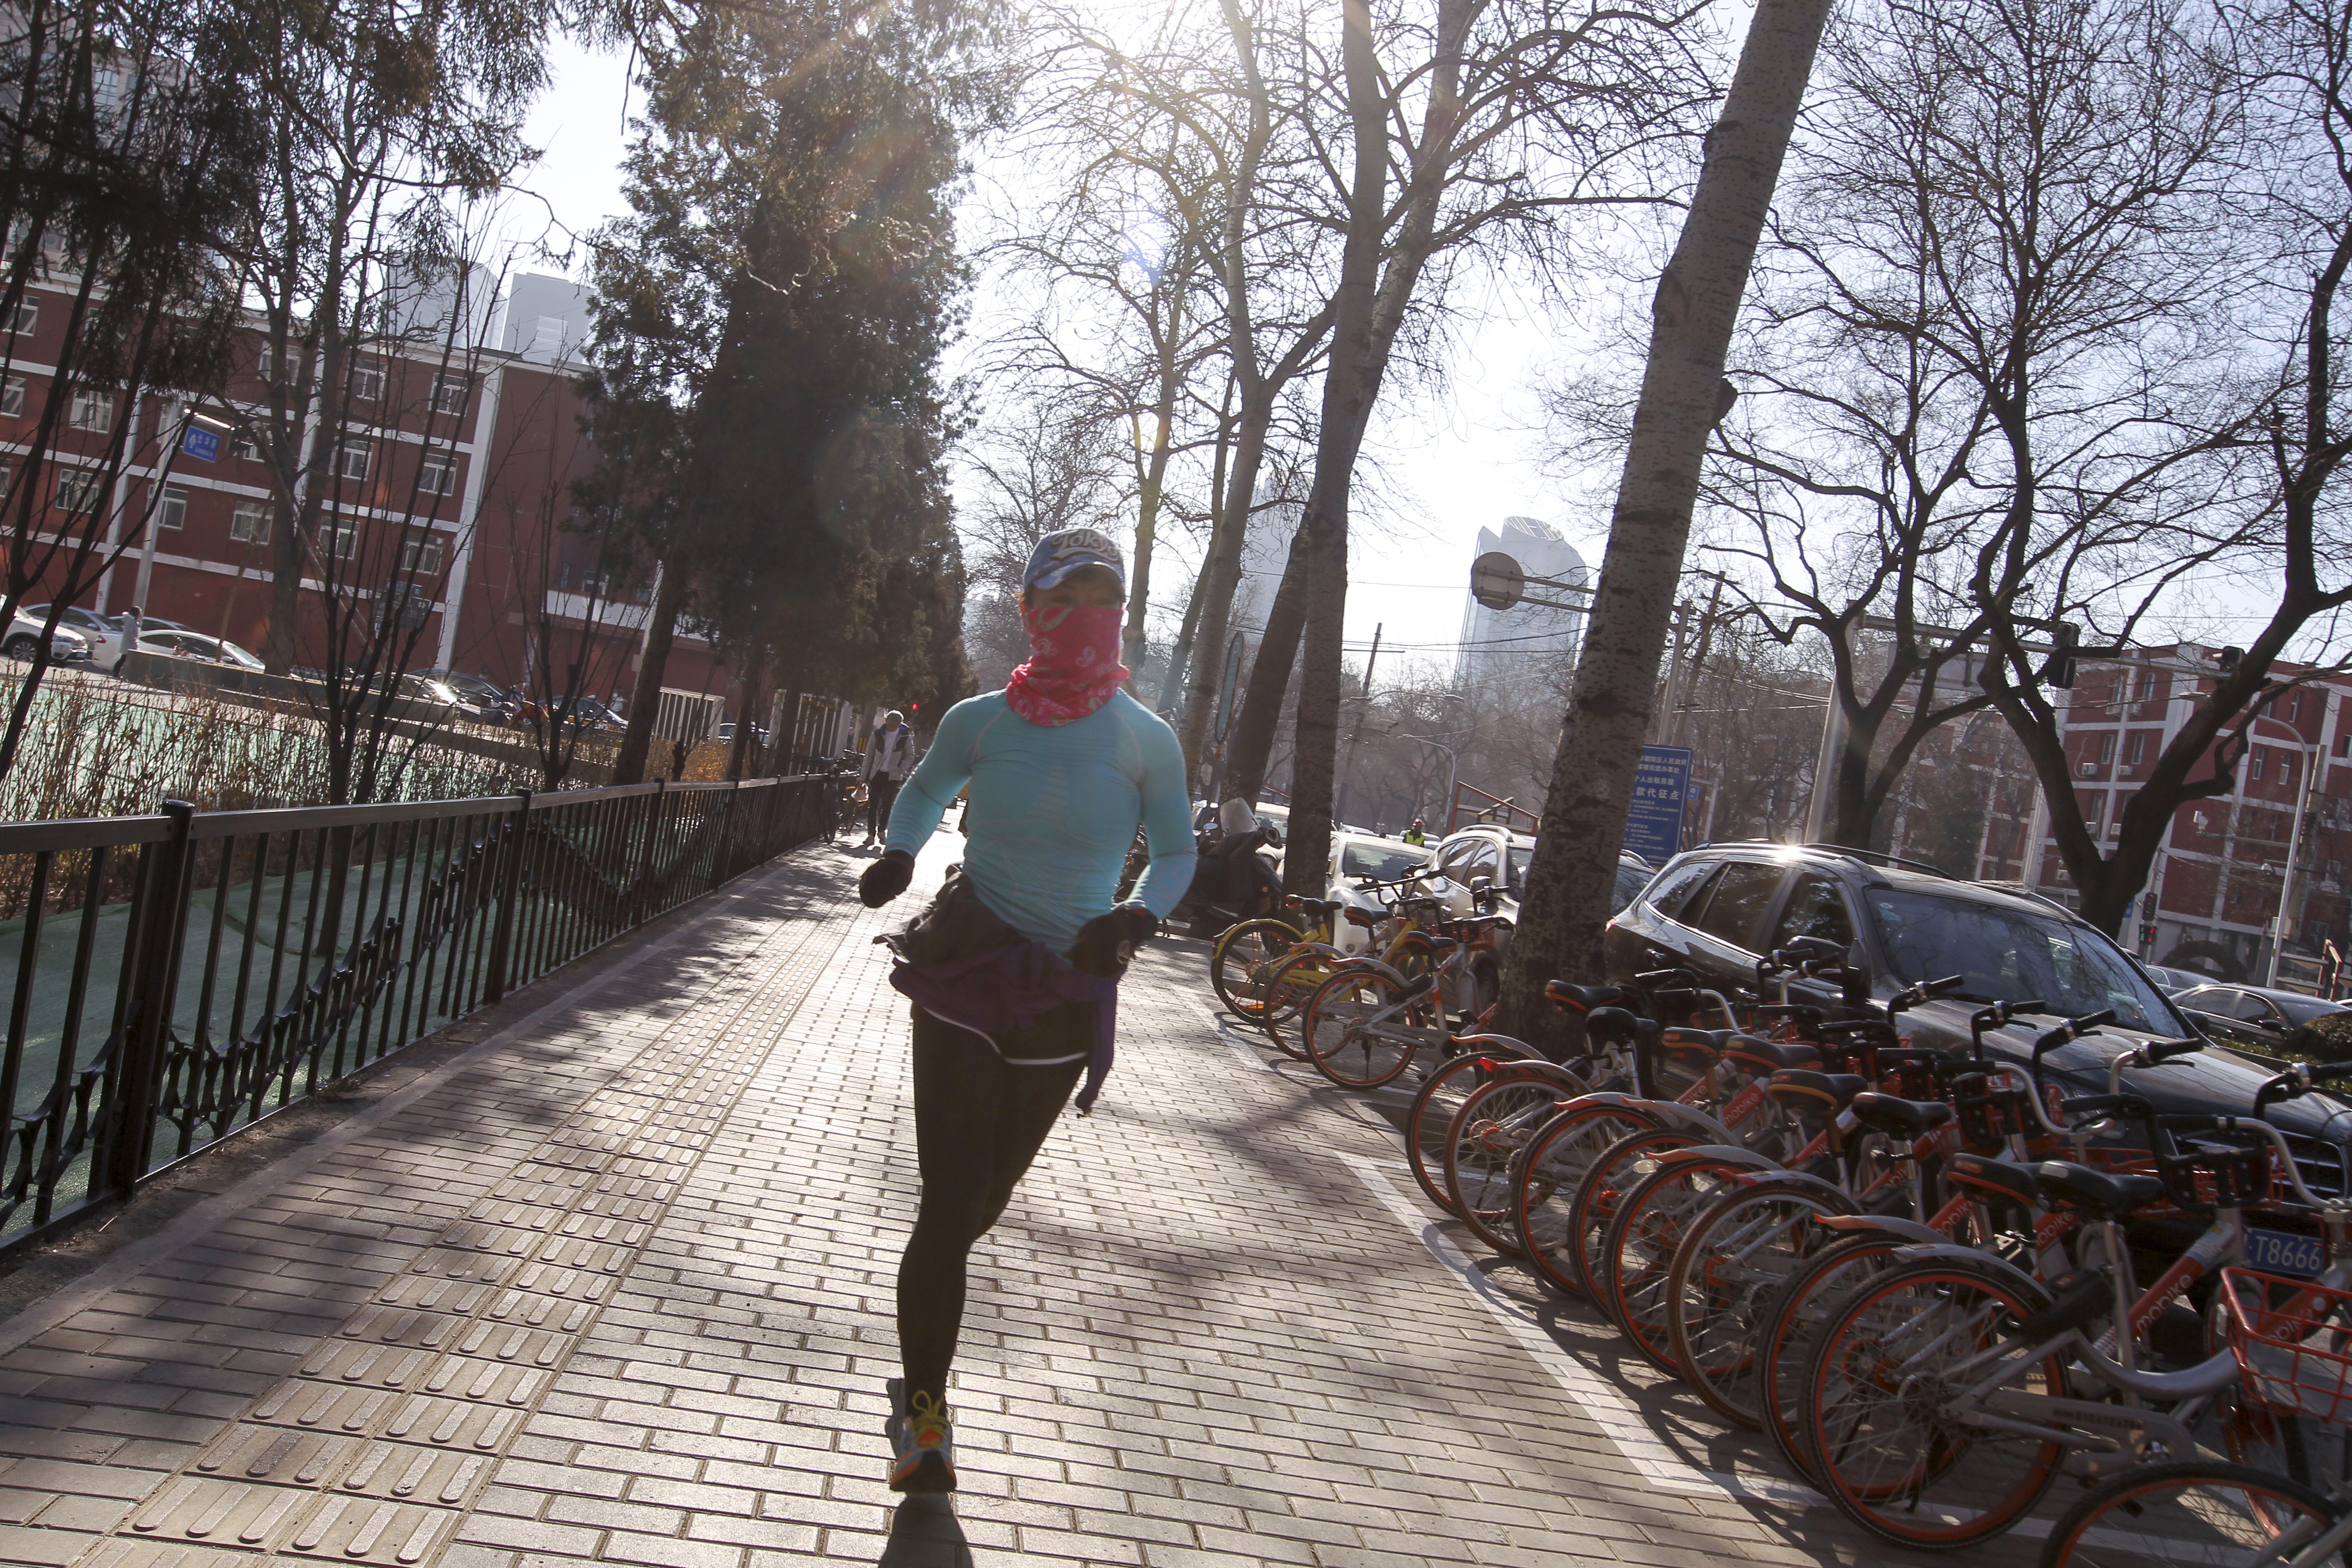 A woman uses a scarf to cover her face as she jogs through Beijing's central business district at noon on Friday. Authorities in the capital earlier issued the first smog alert of the year, saying air quality in the city was set to slump over the coming days. Photo: Simon Song